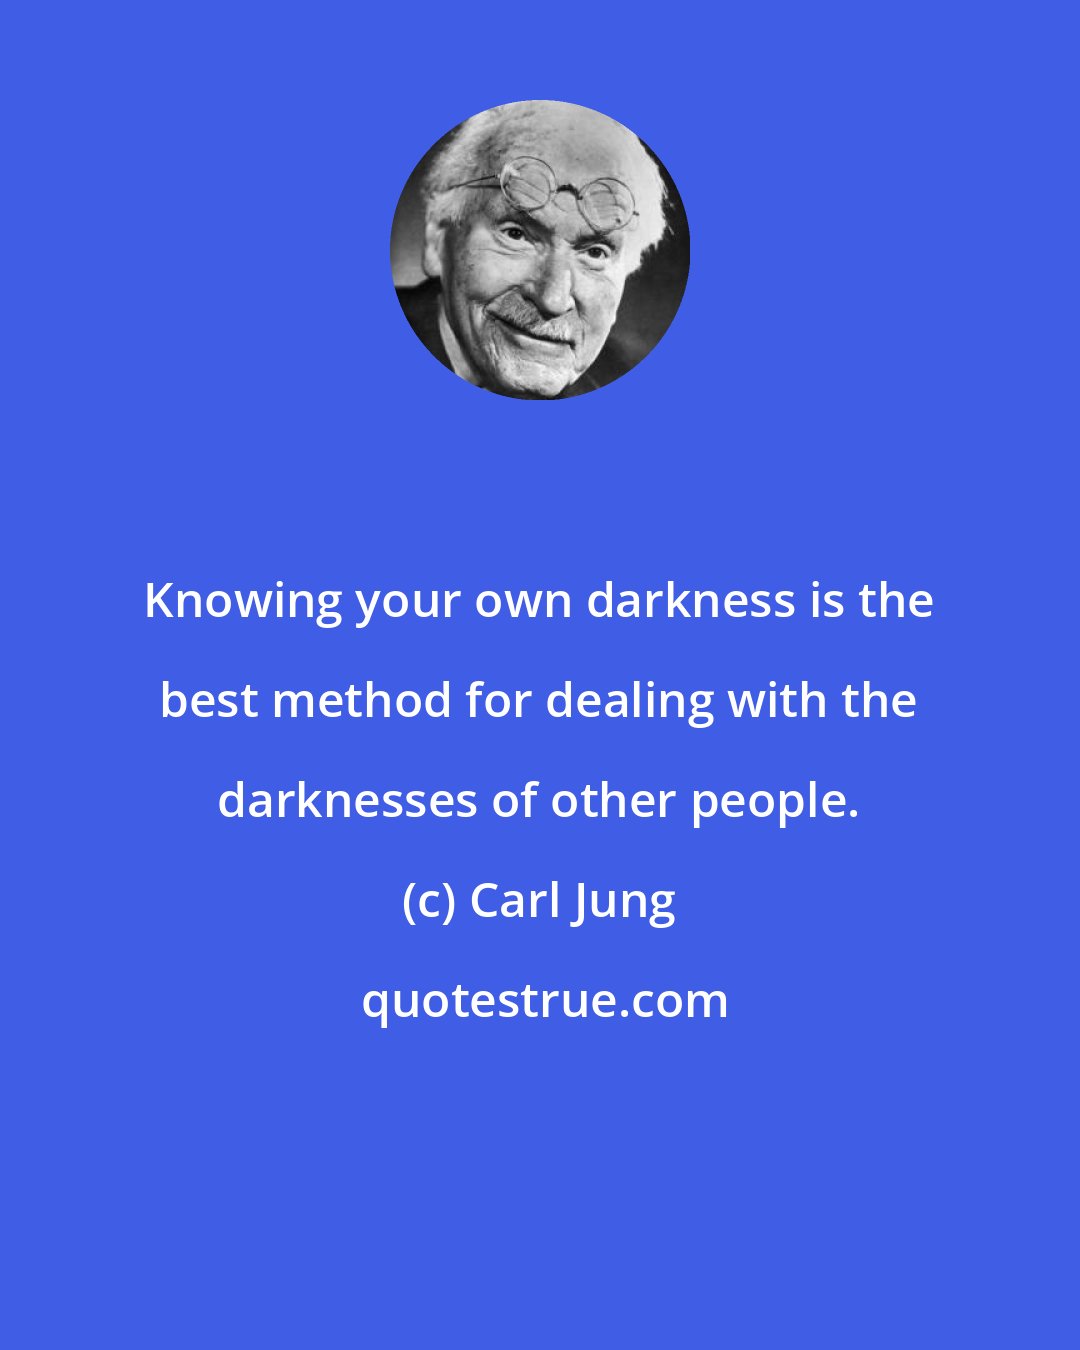 Carl Jung: Knowing your own darkness is the best method for dealing with the darknesses of other people.